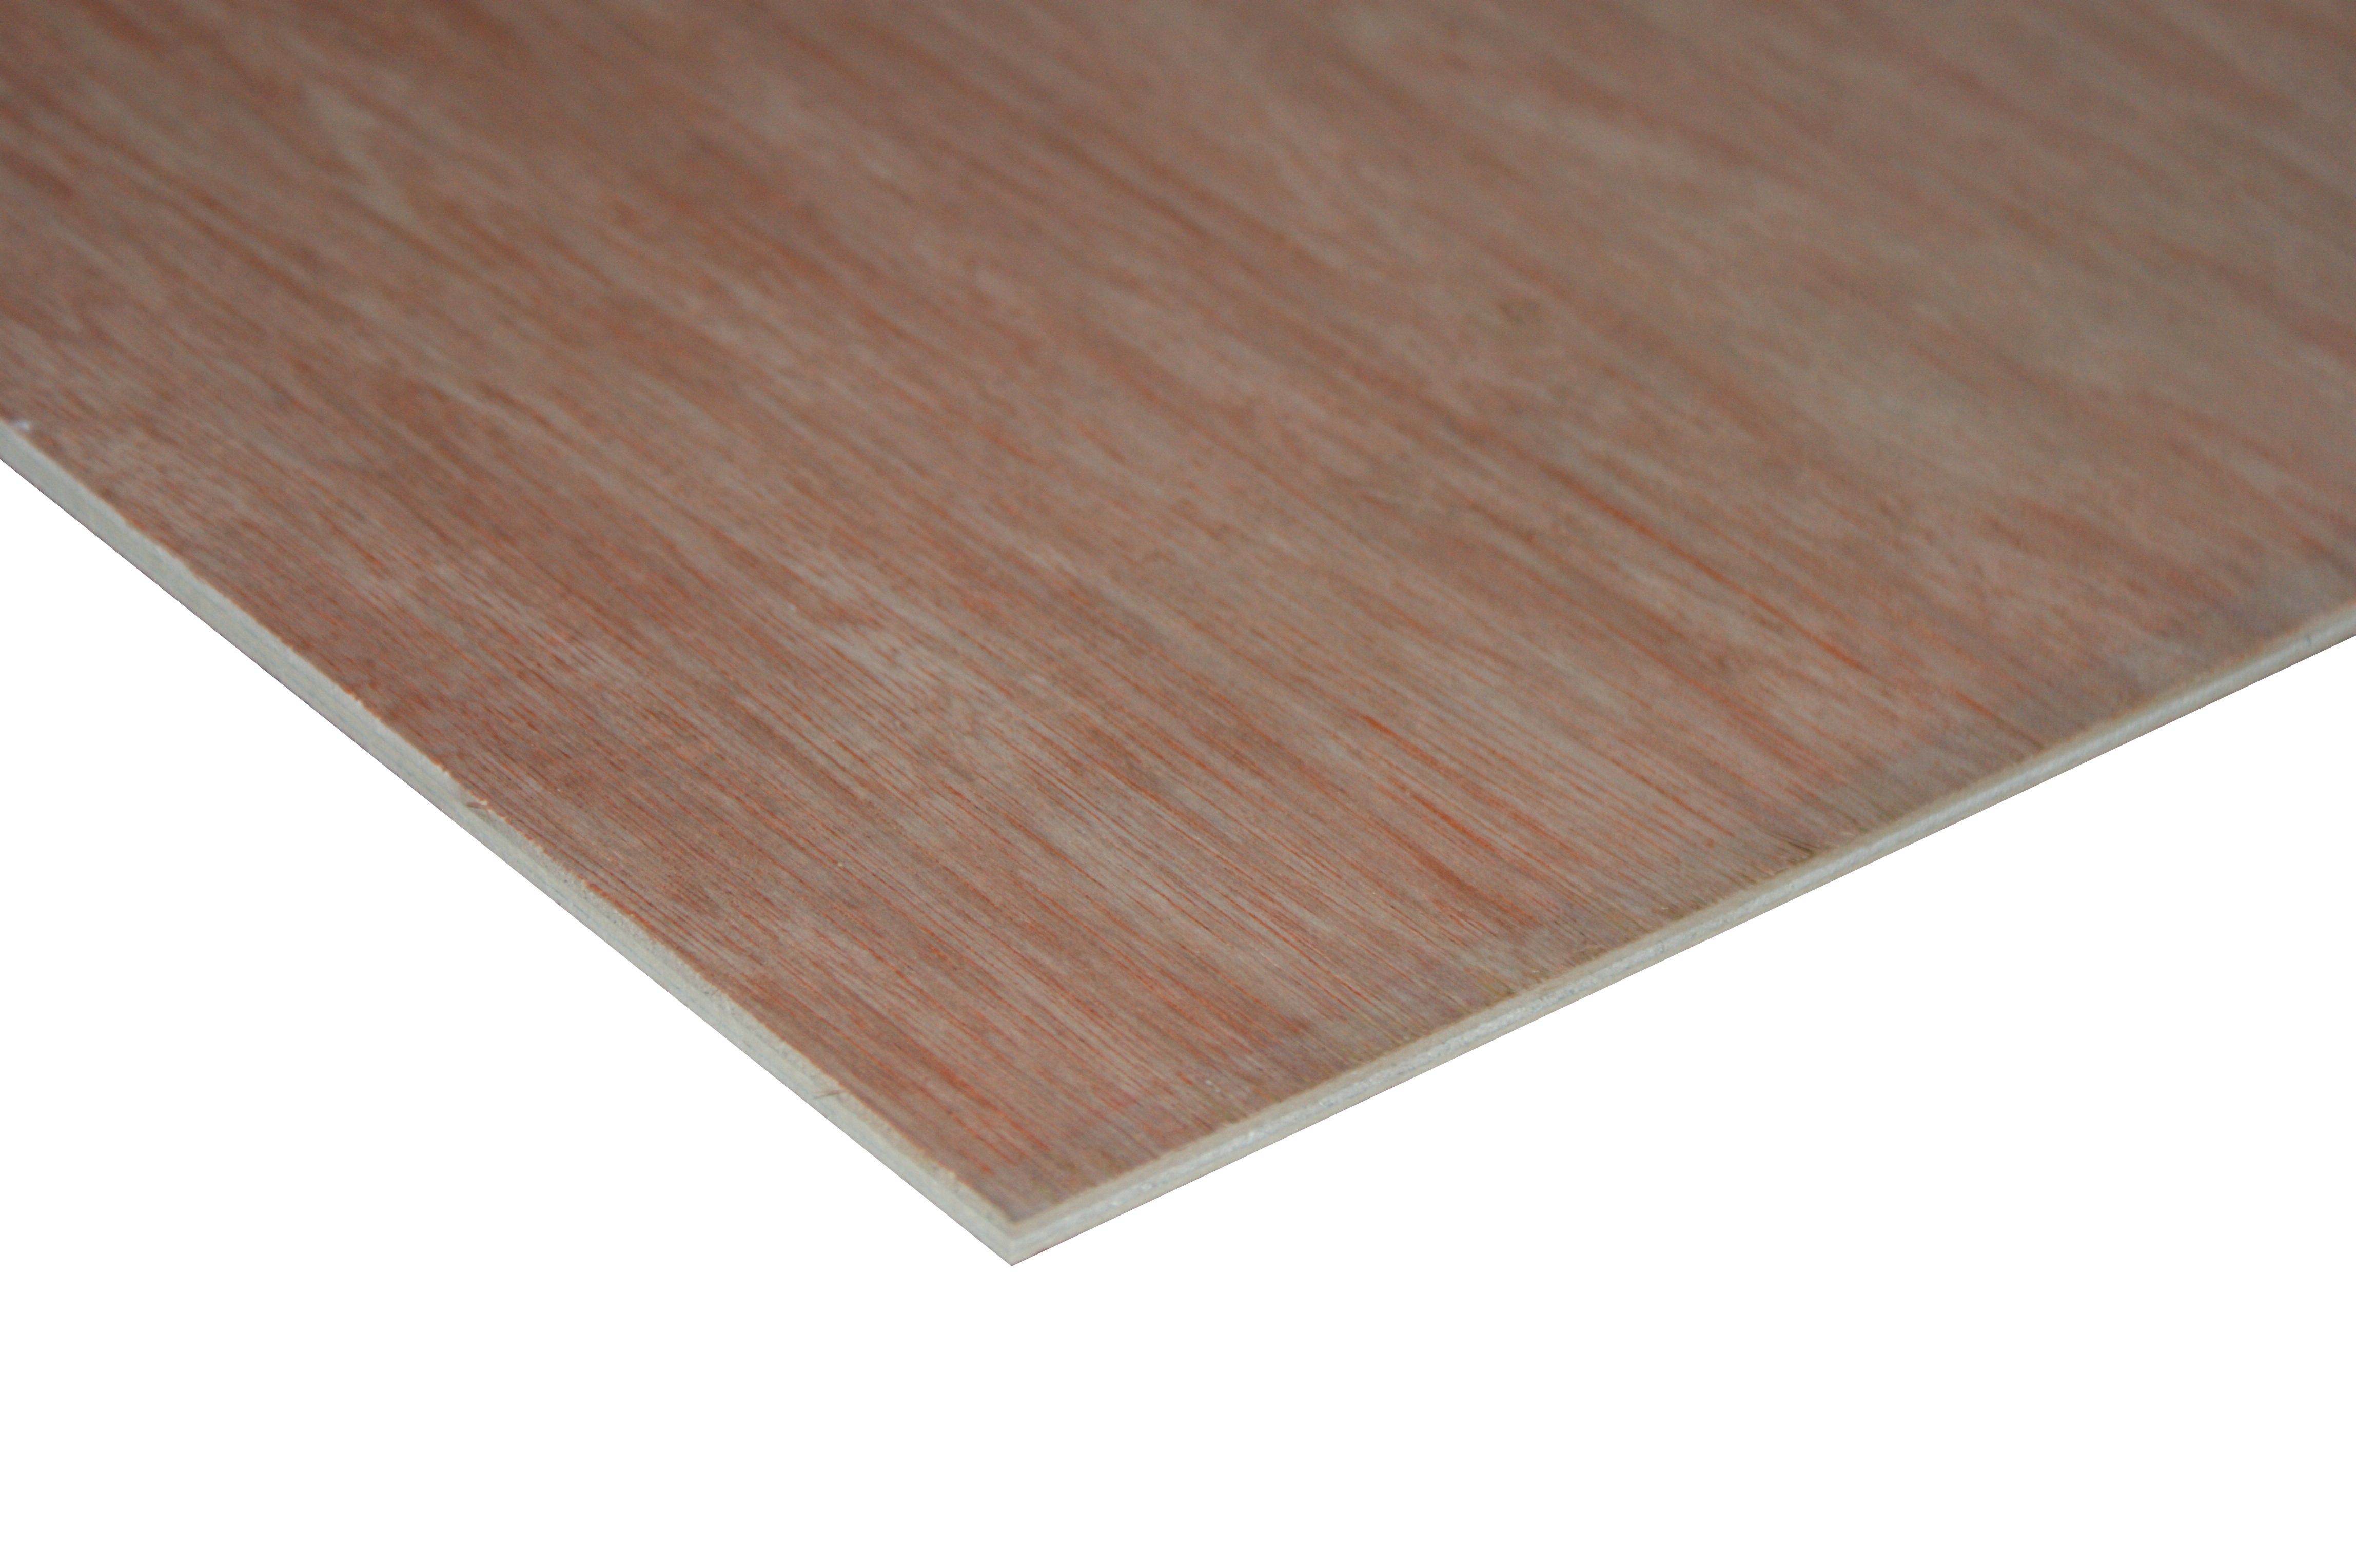 Non-Structural Hardwood Plywood Sheet - 5.5 x 607 x 1829mm